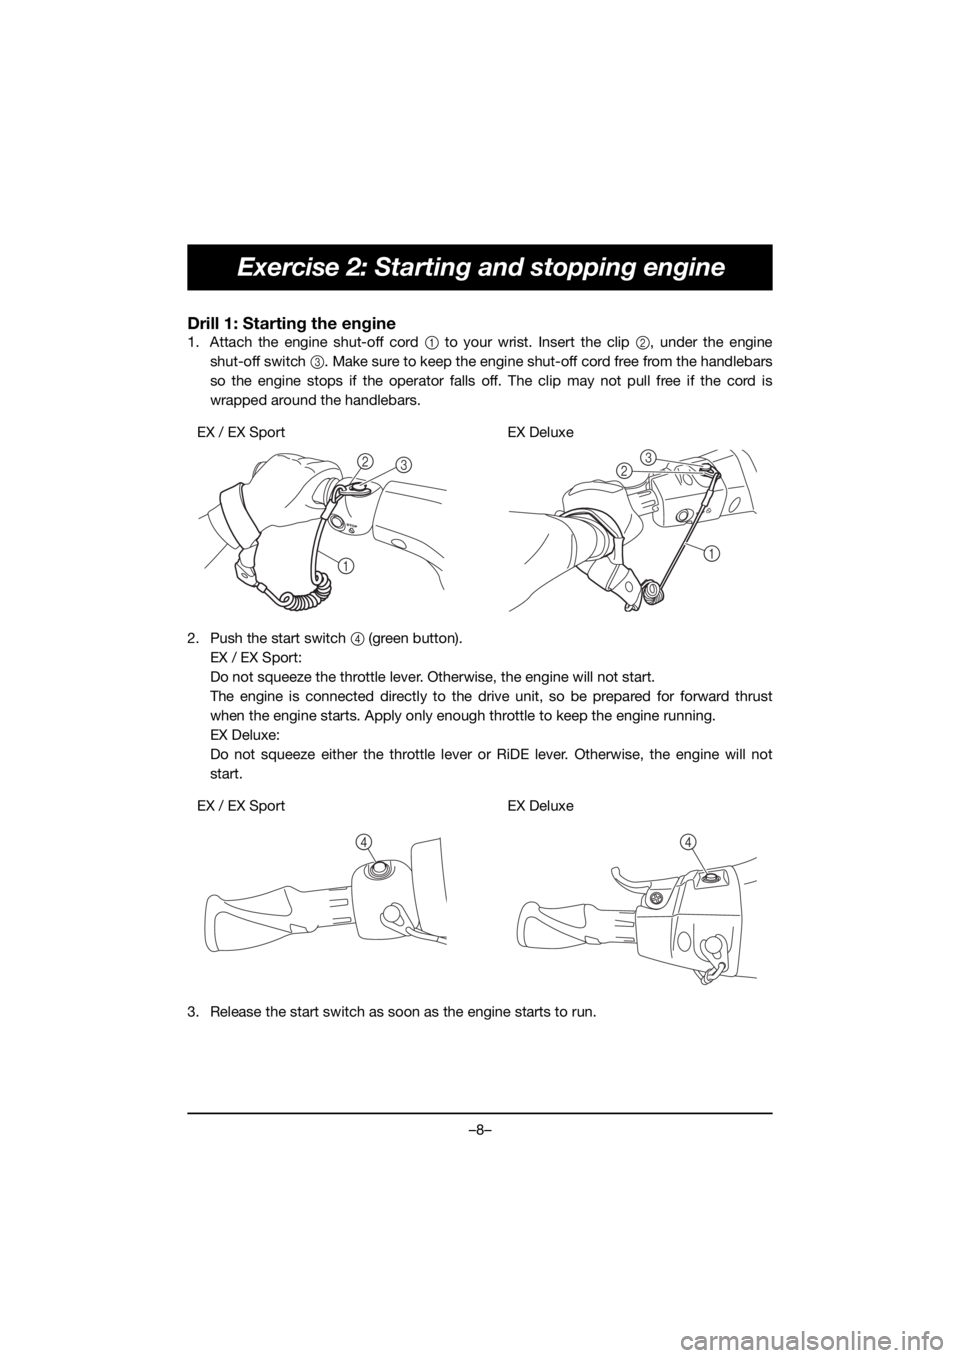 YAMAHA EX SPORT 2020  Betriebsanleitungen (in German) –8–
Exercise 2: Starting and stopping engine
Drill 1: Starting the engine
1. Attach the engine shut-off cord 1 to your wrist. Insert the clip 2, under the engine
shut-off switch 3. Make sure to ke